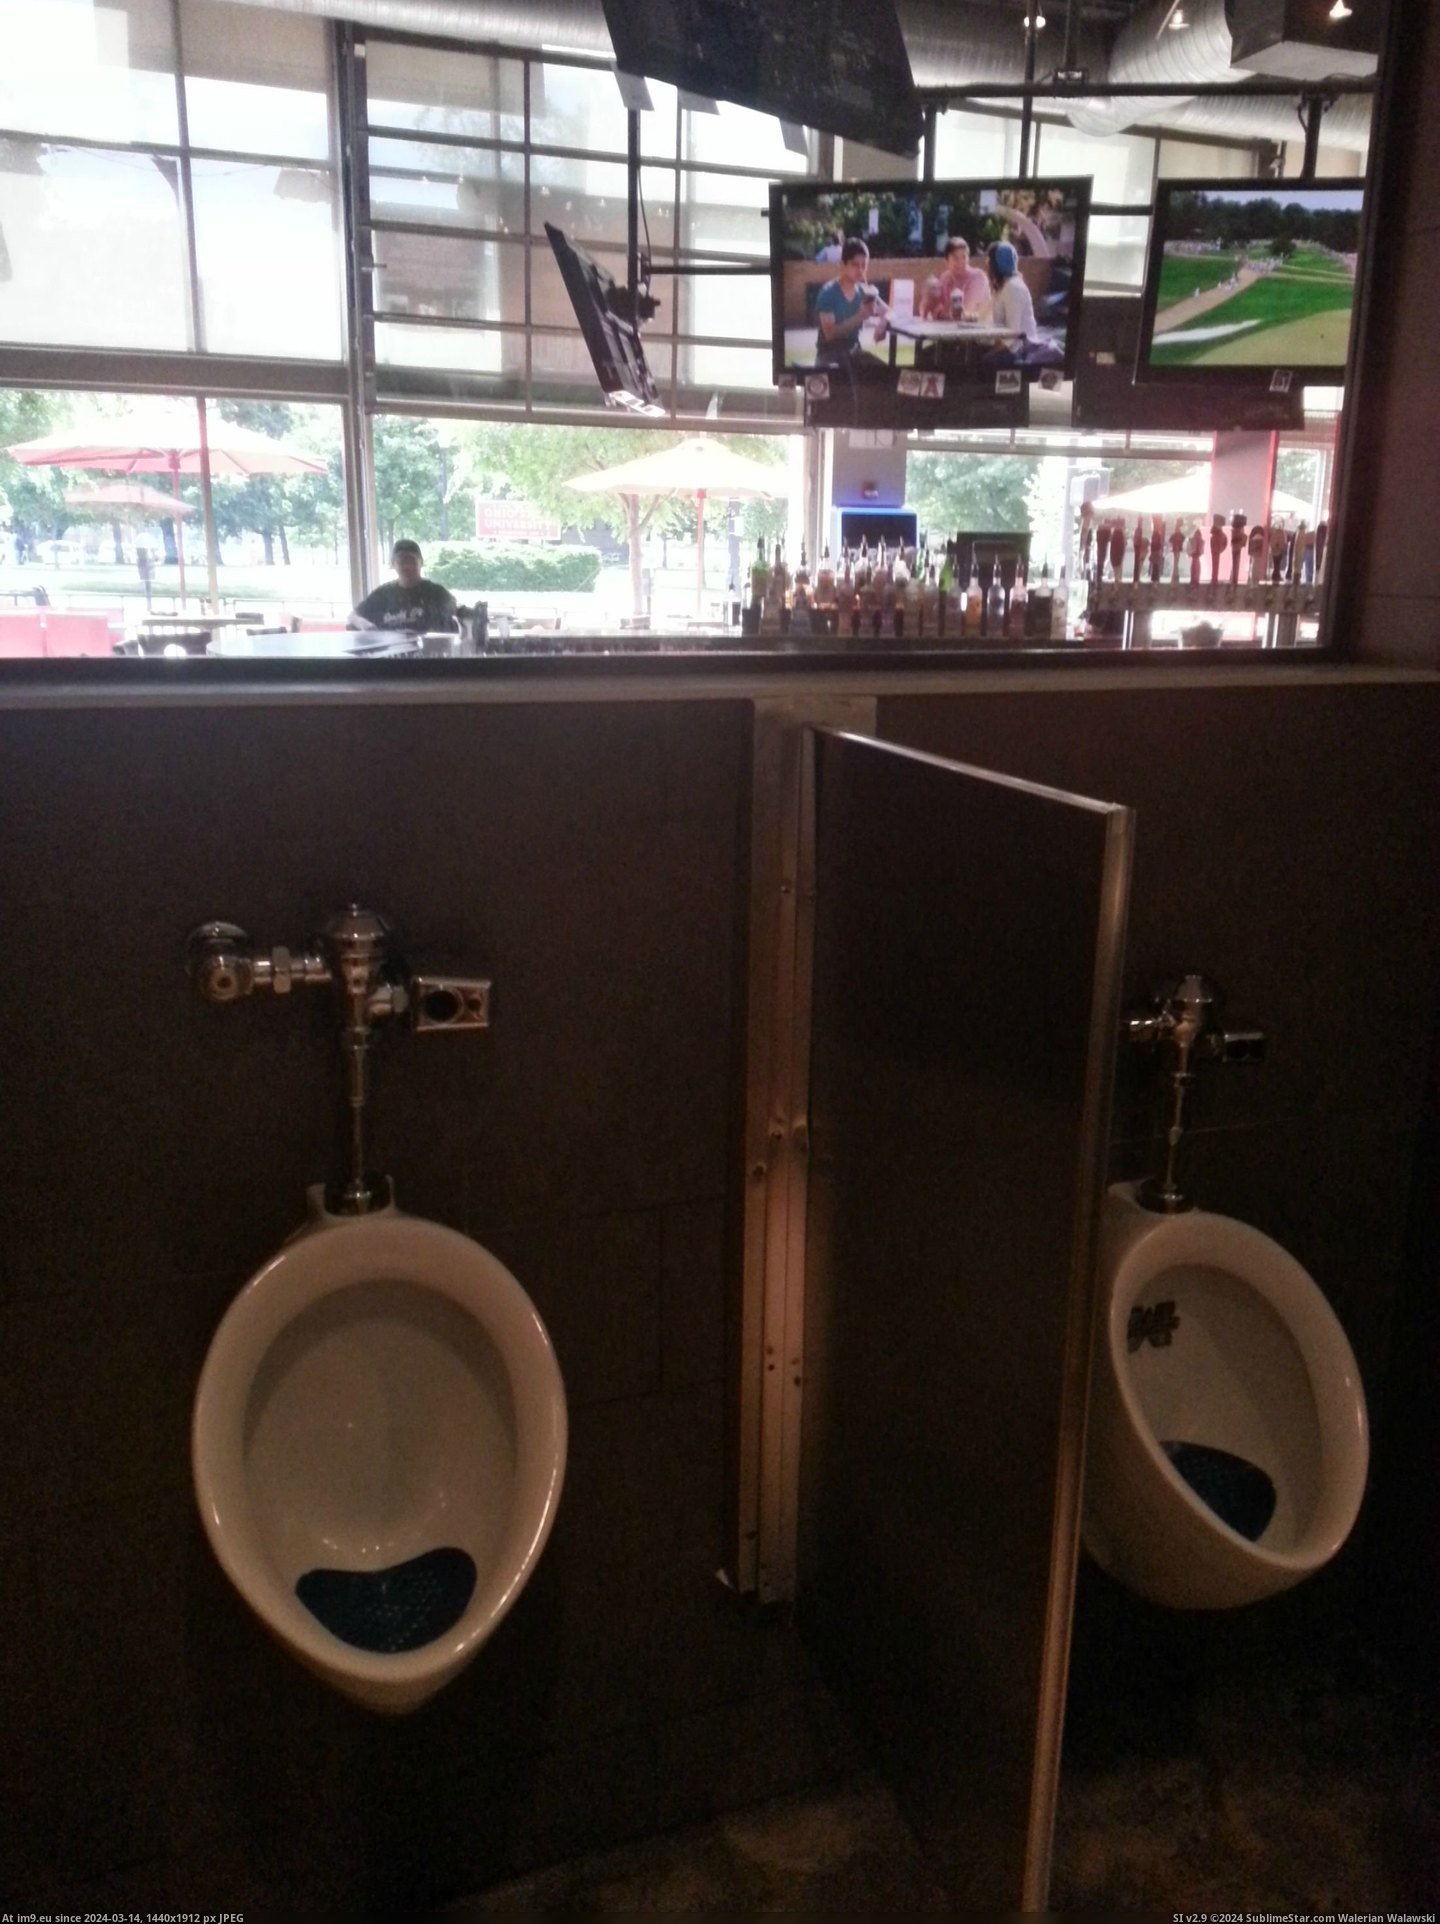 #One #You #Game #Any #Sports #Bathrooms #Way #Glass #Bar [Mildlyinteresting] This sports bar has one way glass in the bathrooms so you don't miss any of the game Pic. (Изображение из альбом My r/MILDLYINTERESTING favs))